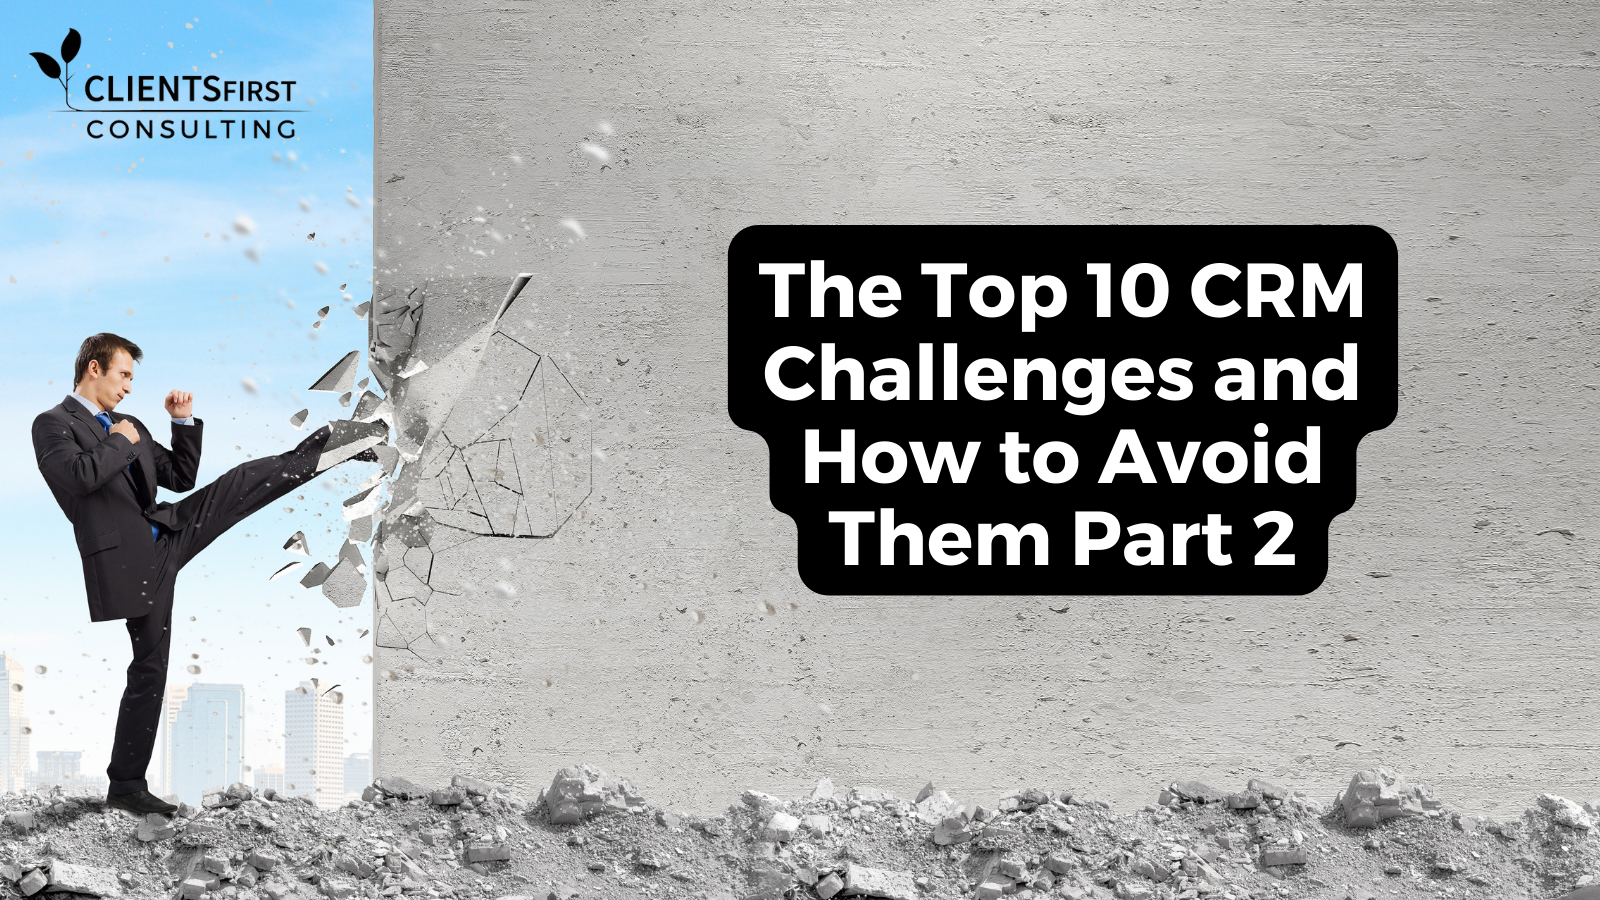 The Top 10 CRM Challenges And How To Avoid Them Part 2